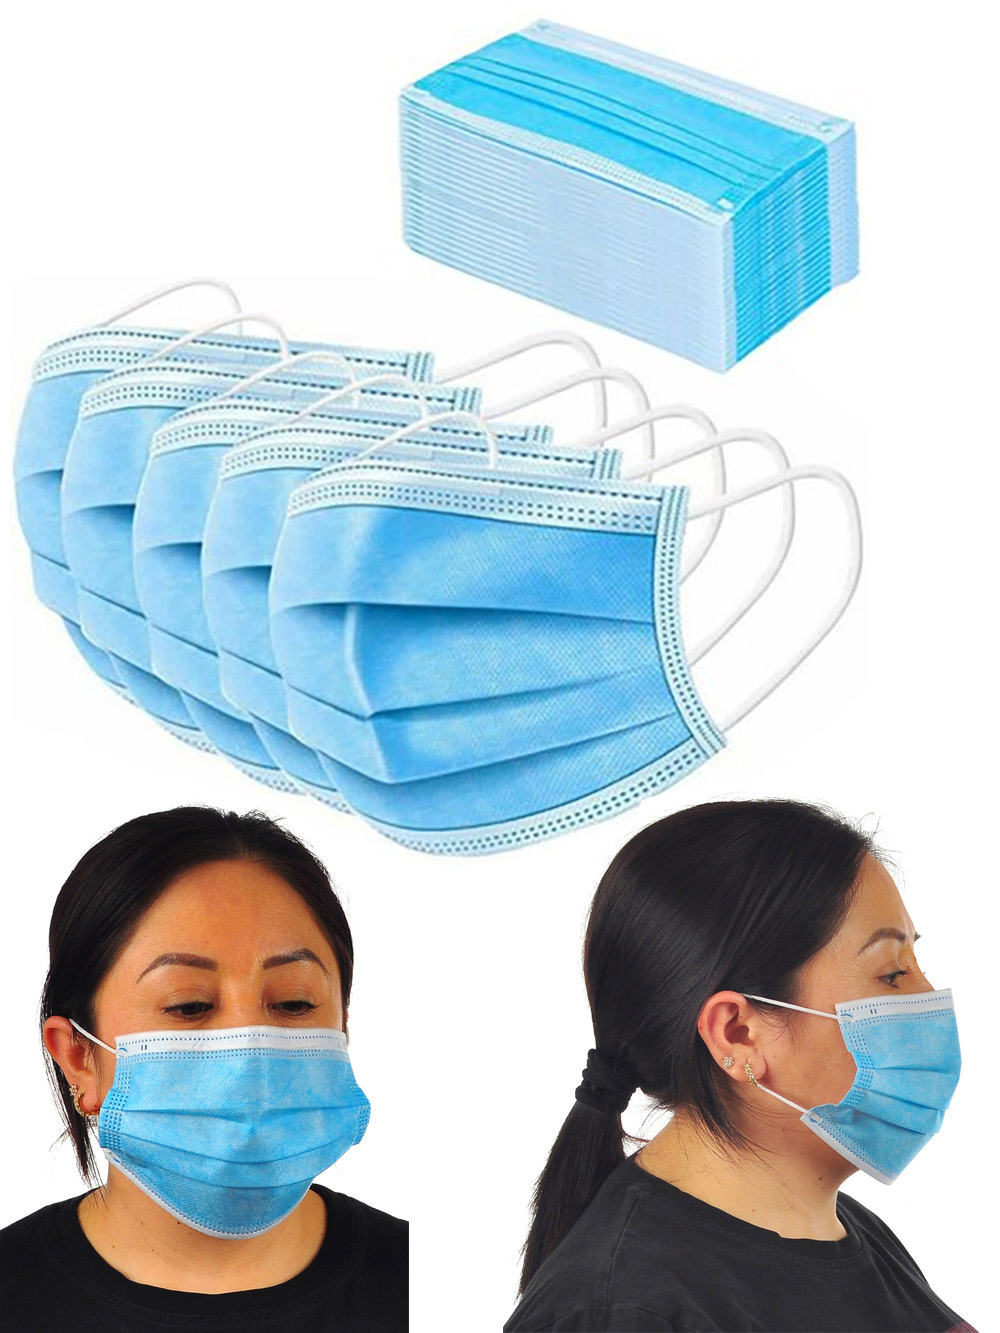 Disposable Face Mouth Mask 3-Ply Ear Loop - image 3 of 3